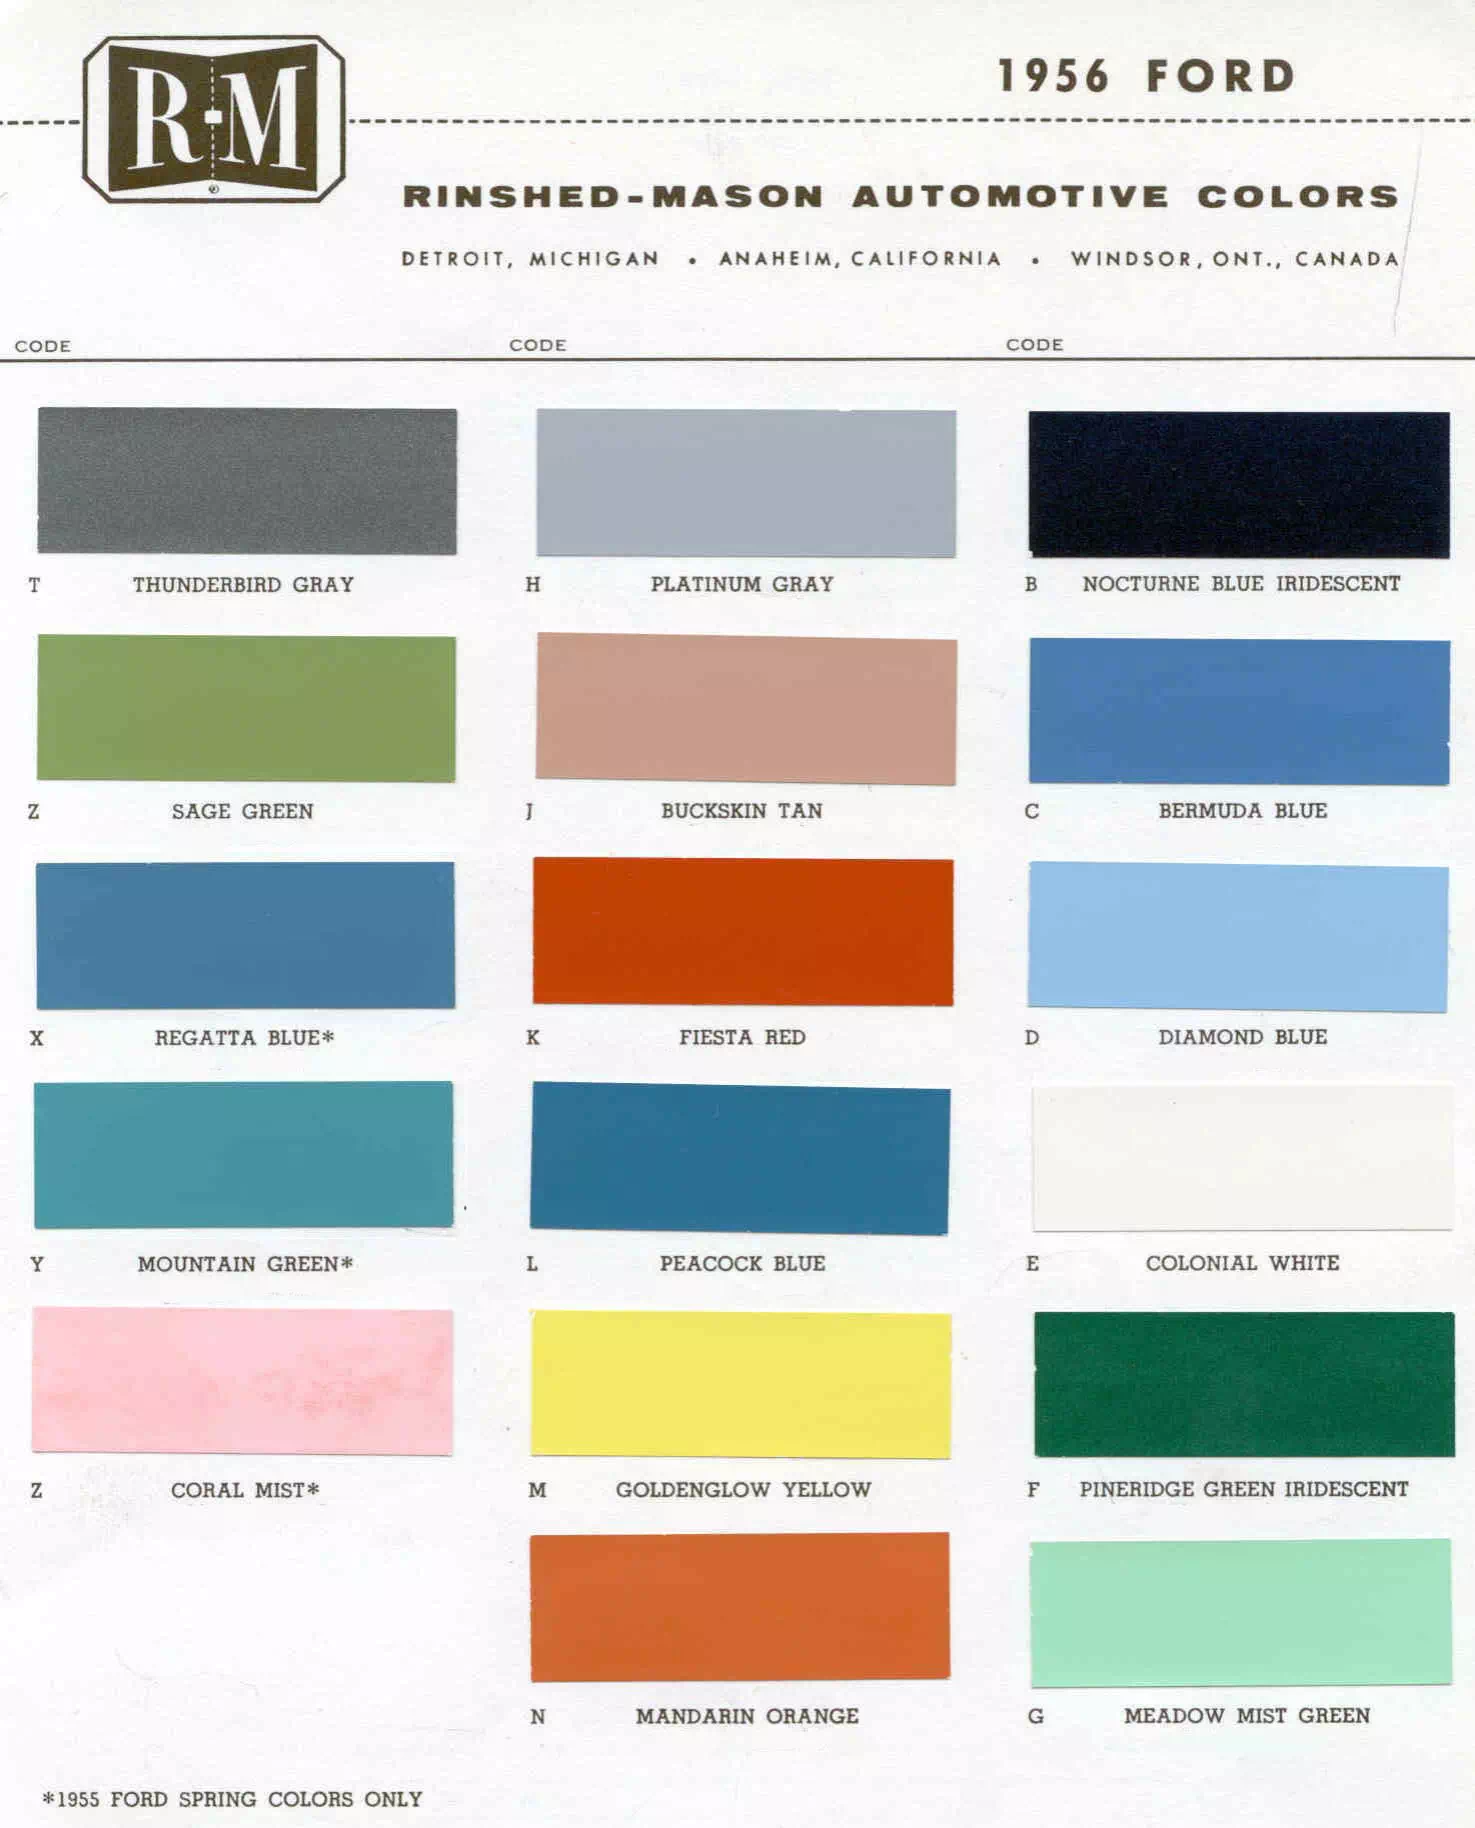 exterior colors, their codes, and example swatches used on the exterior of the vehicles in 1956